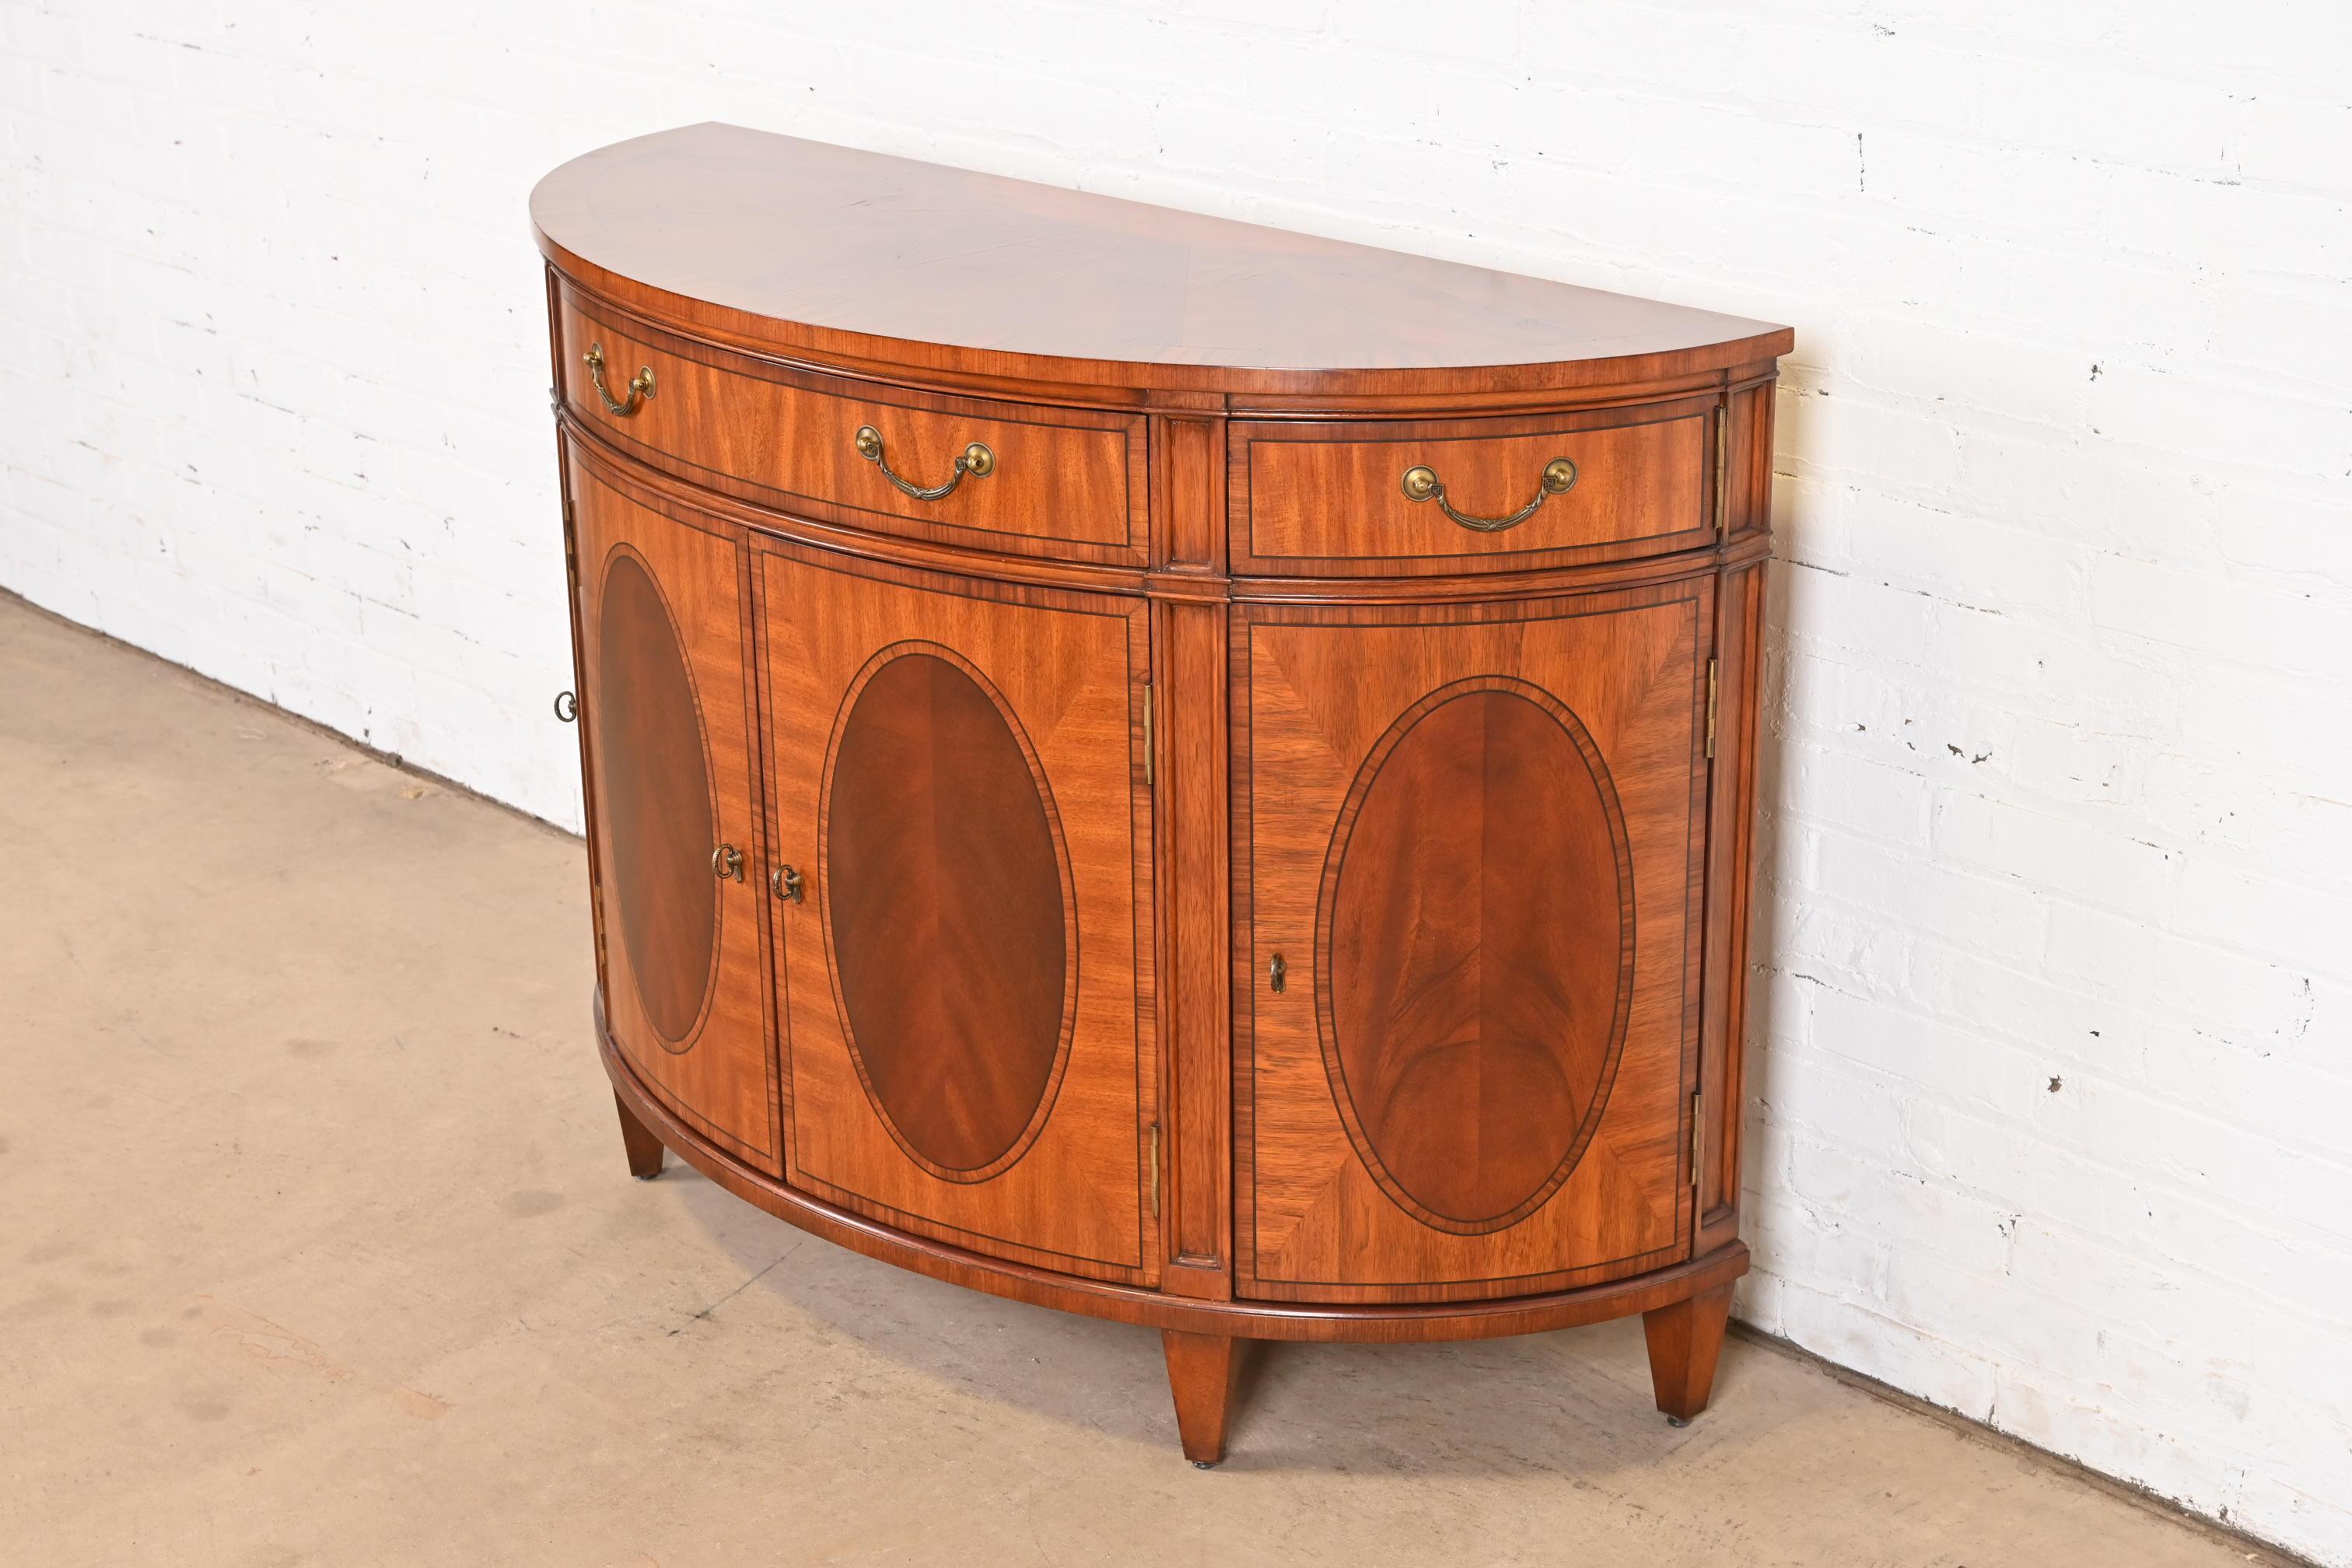 20th Century Regency Inlaid Mahogany Demilune Sideboard or Bar Cabinet For Sale